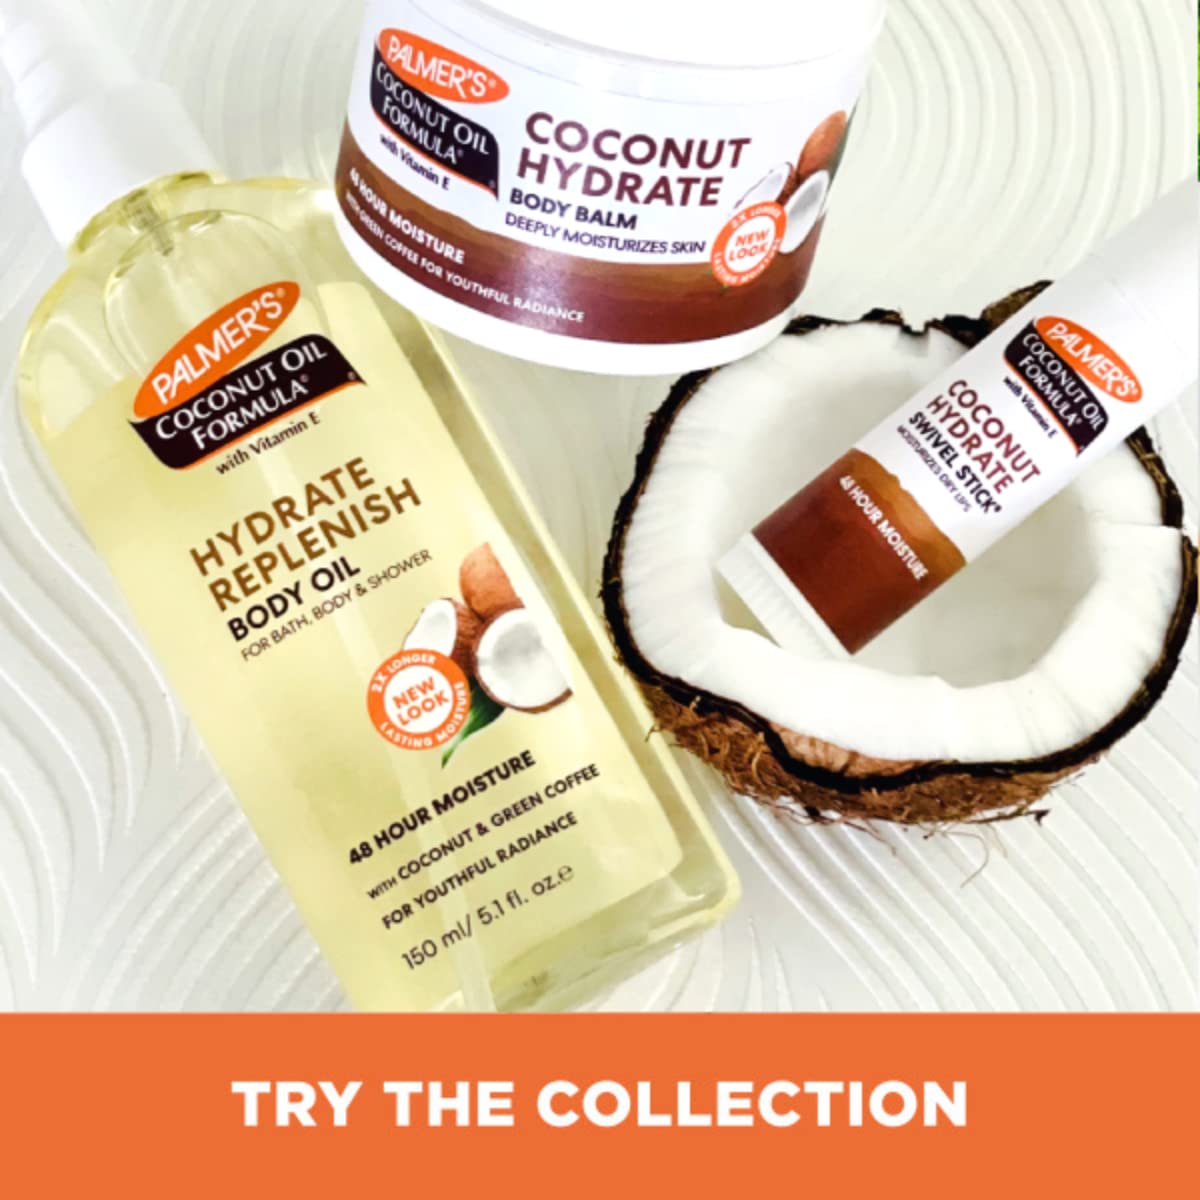 Palmer's Coconut Oil Formula Protect & Hydrate Duo Pack, SPF 15 Lip Balm & Multi-Purpose Swivel Stick (Set of 2) : Grocery & Gourmet Food